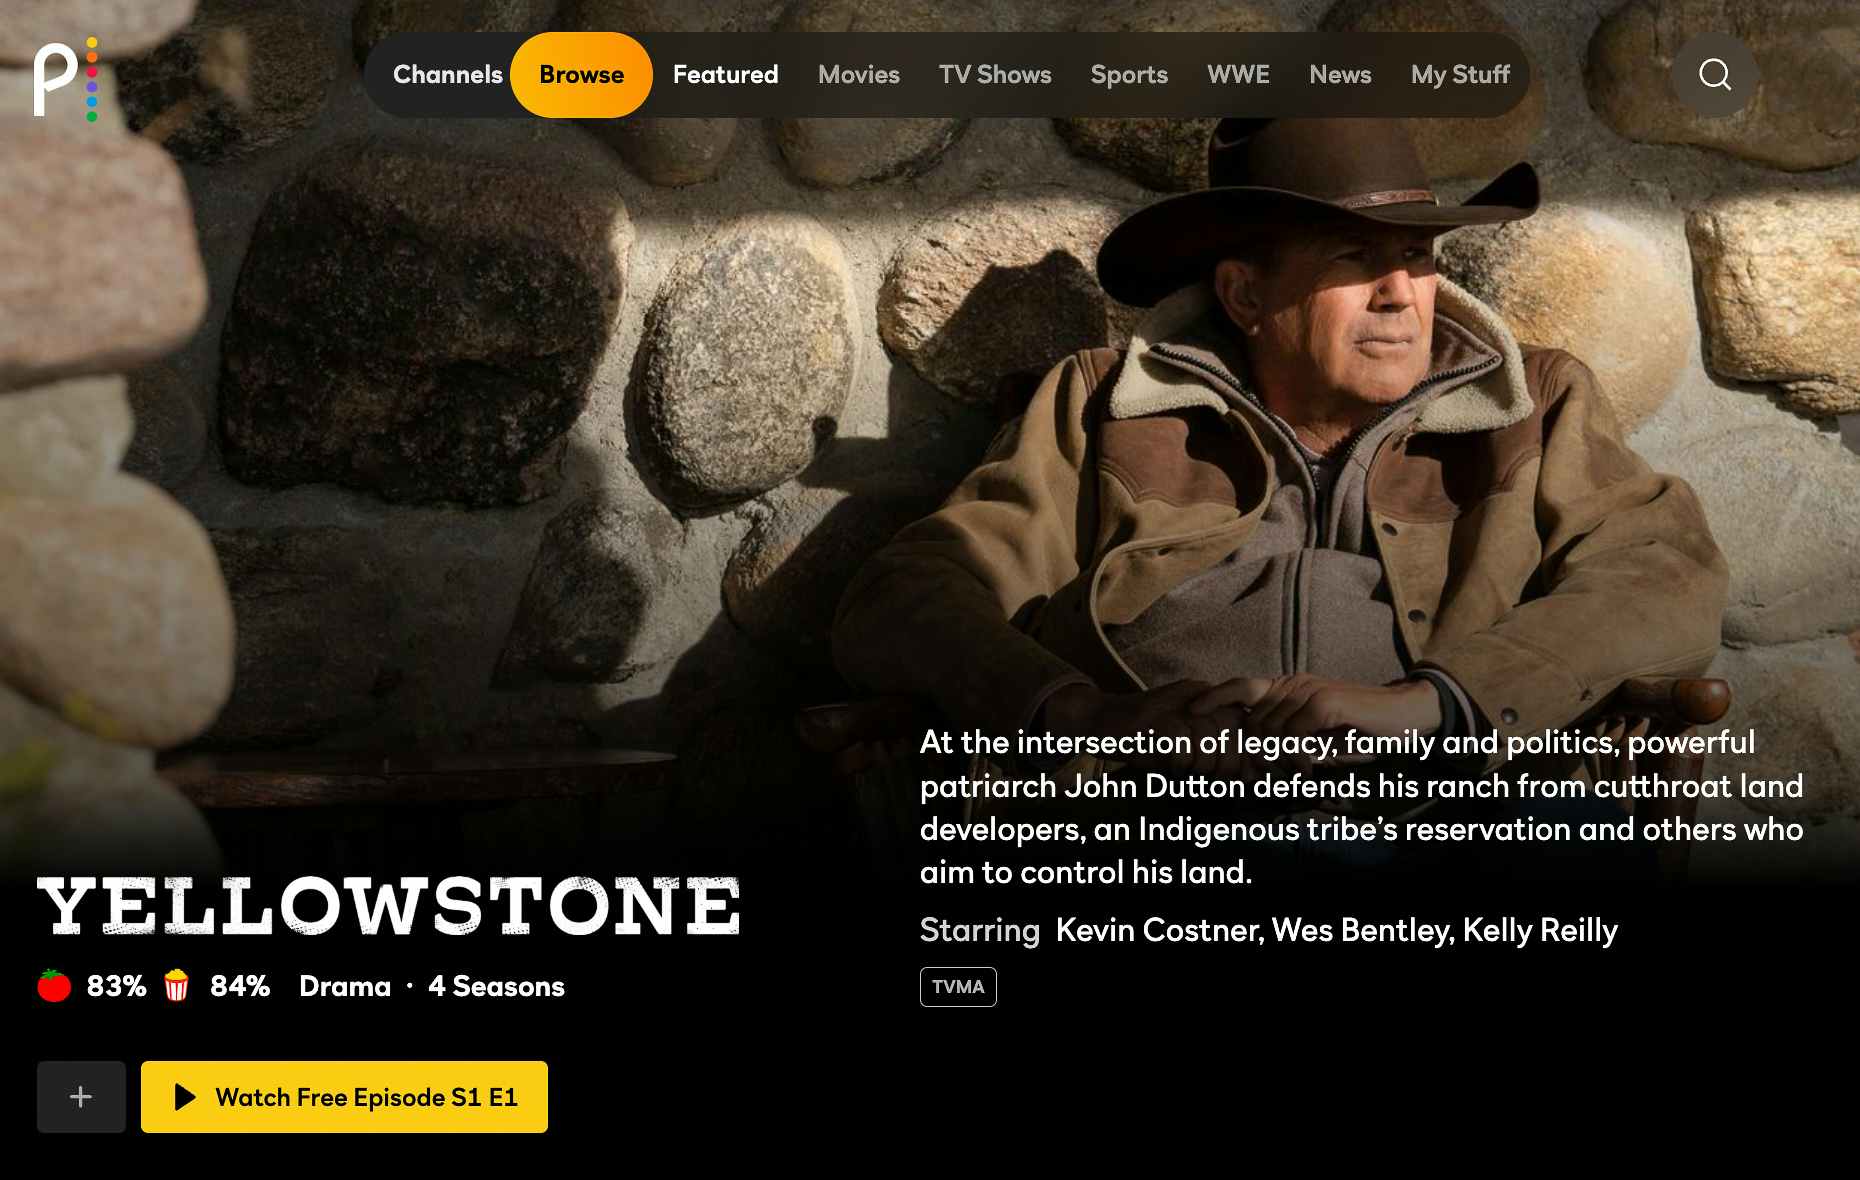 A screenshot from the Yellowstone series page on the Peacock streaming website.